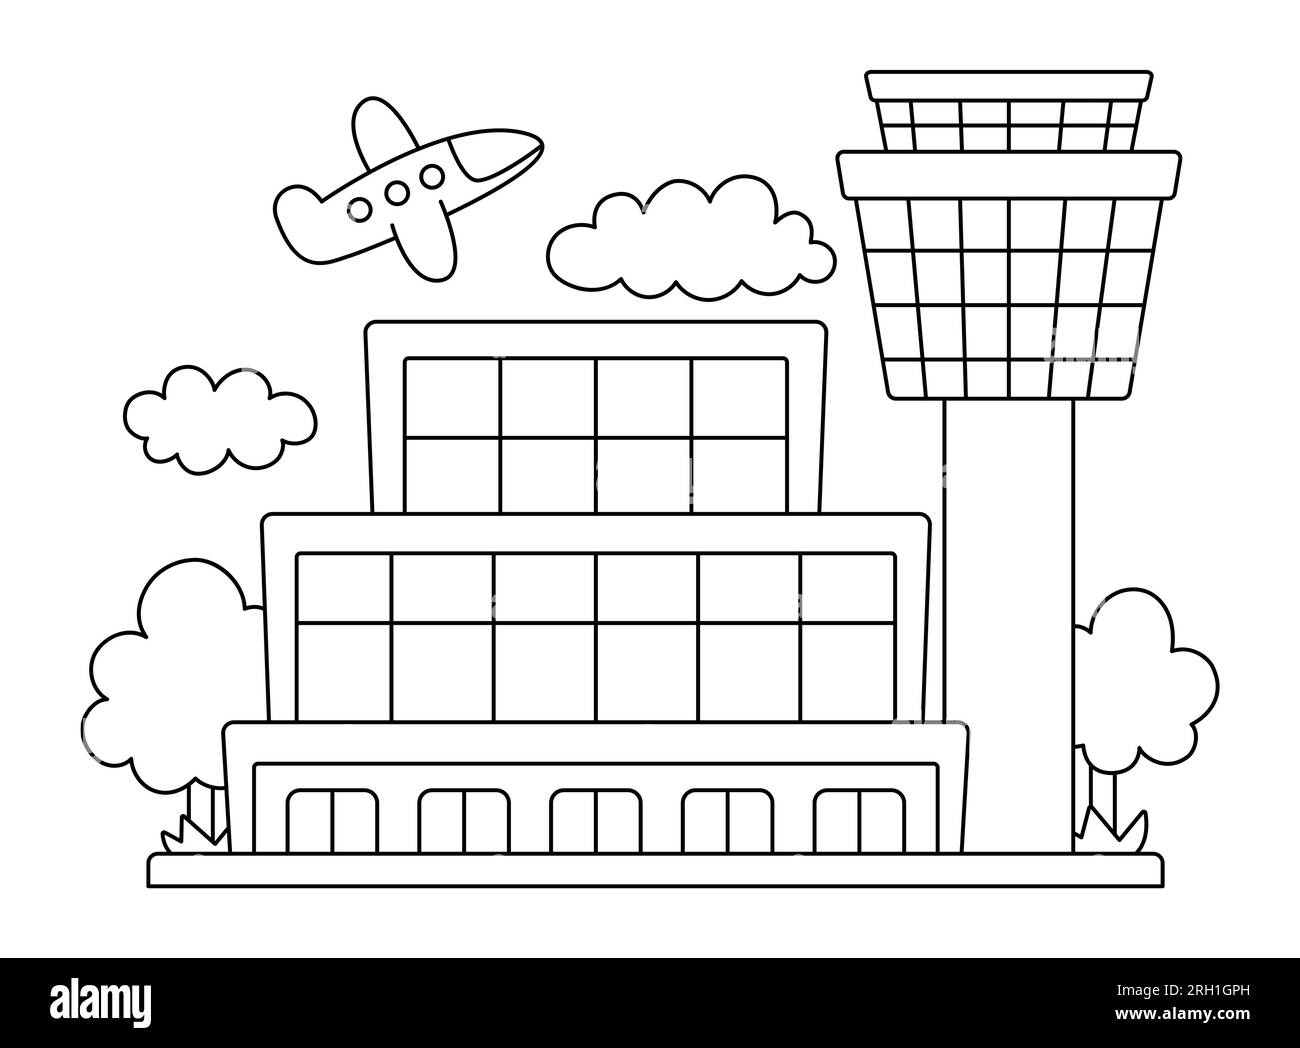 Vector black and white airport line icon. Air port clipart with dispatcher or control tower, plane, building, clouds. Flight terminal illustration or Stock Vector